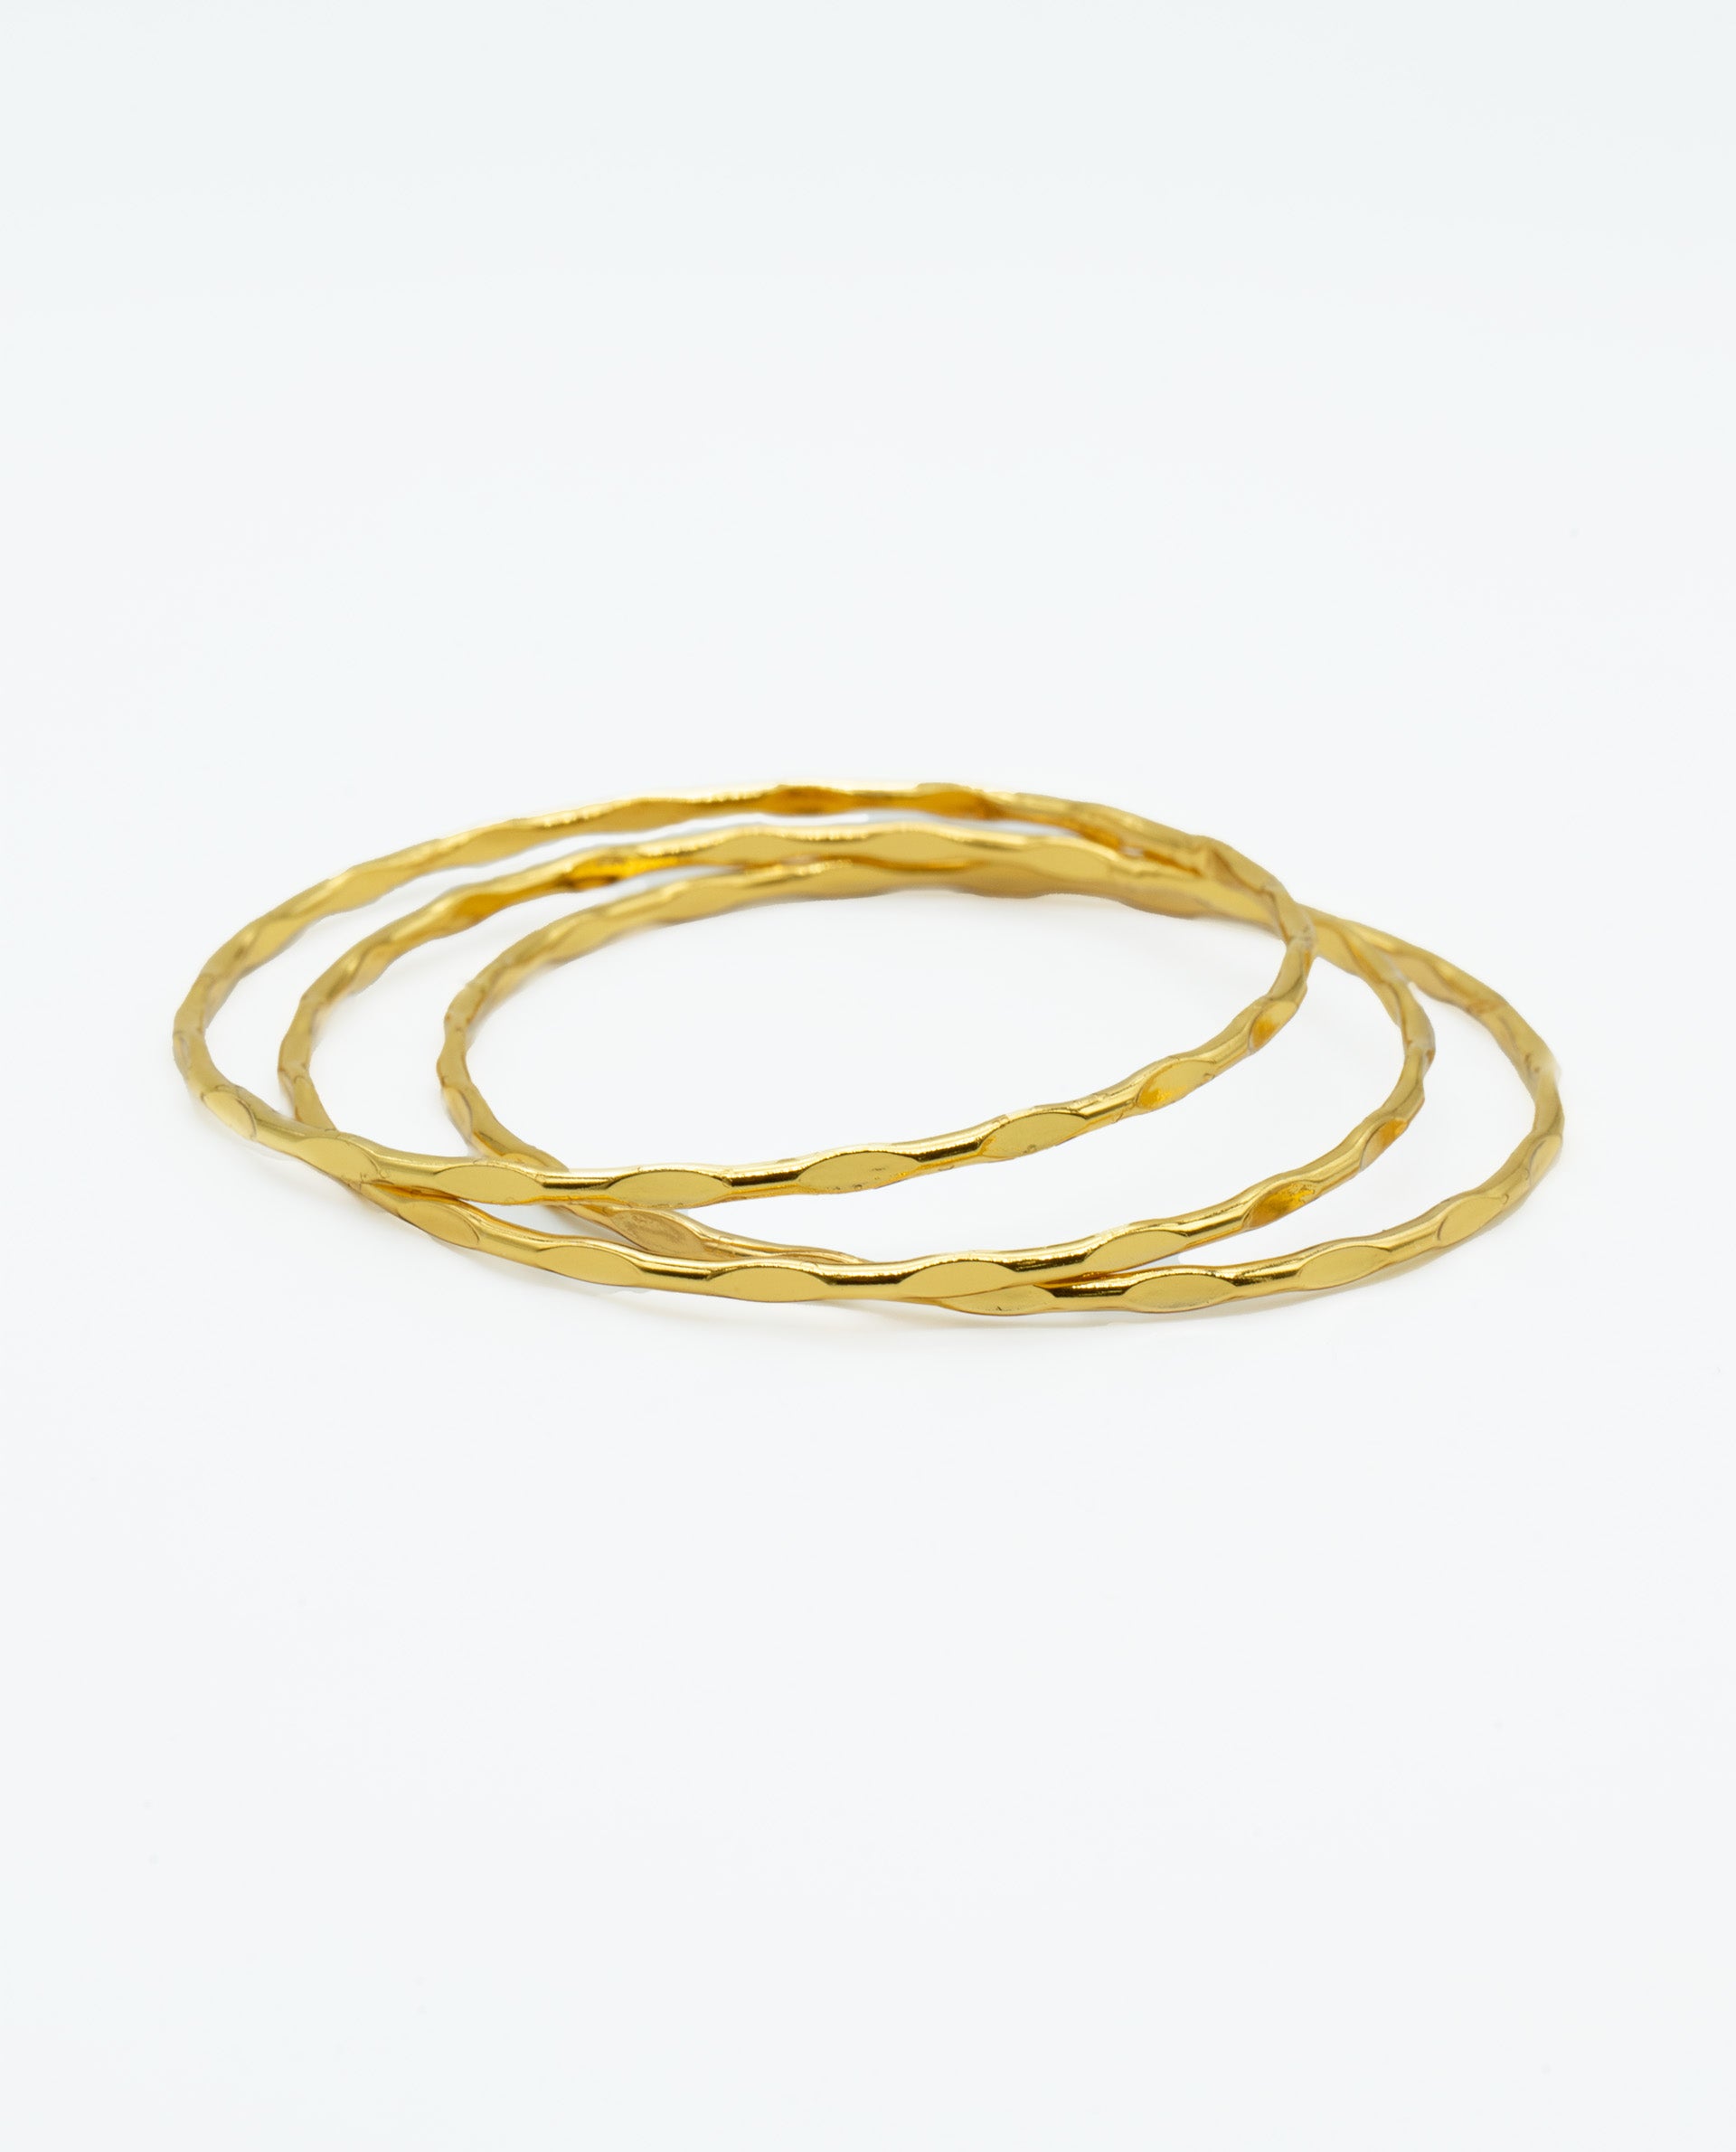 PACK 3 PROTECTION BRACELETS - GOLD PLATED